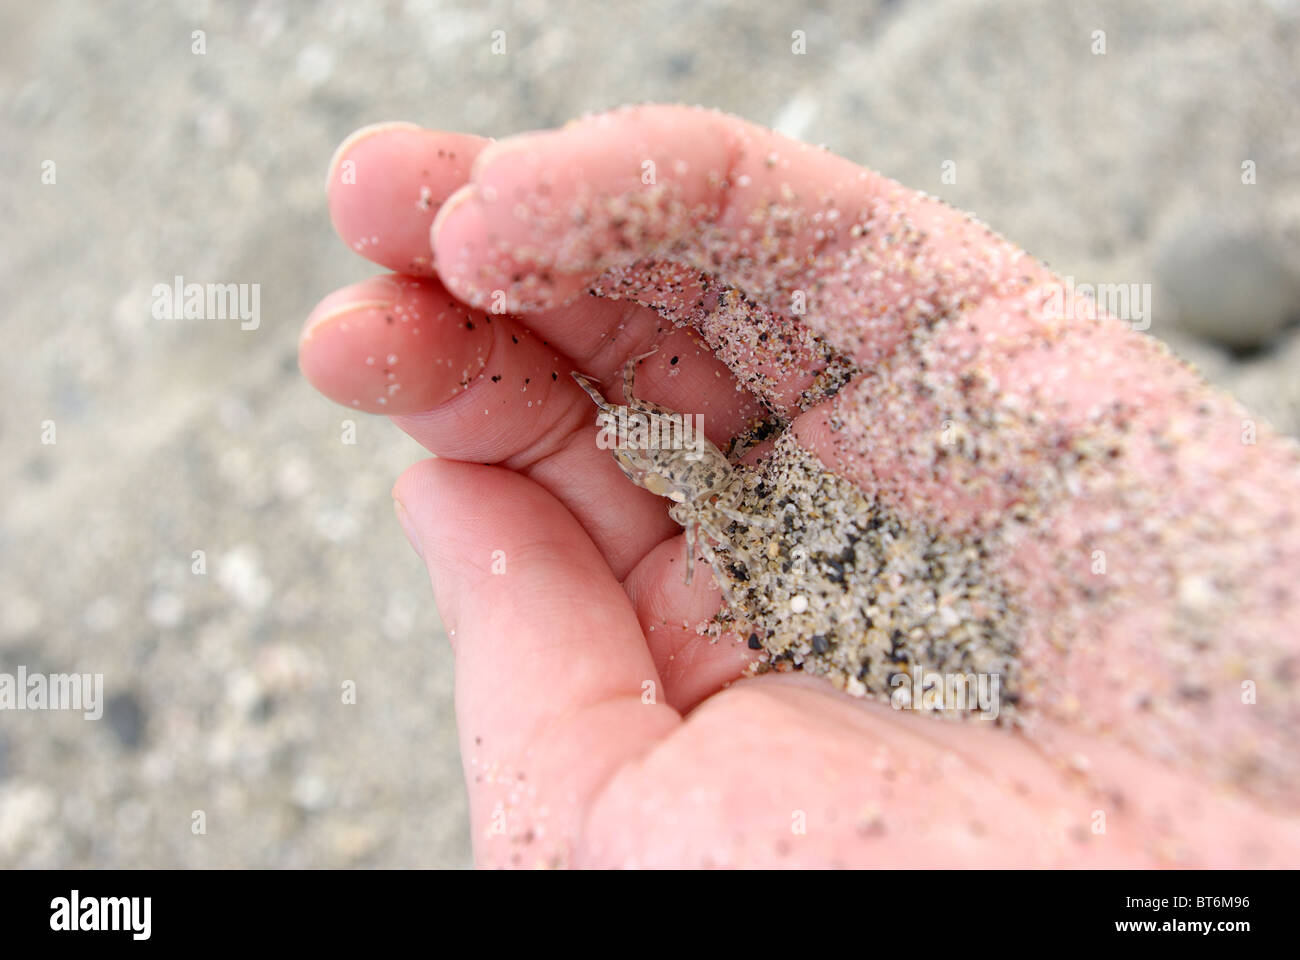 tiny-camouflaged-sand-crab-in-hand-on-ya